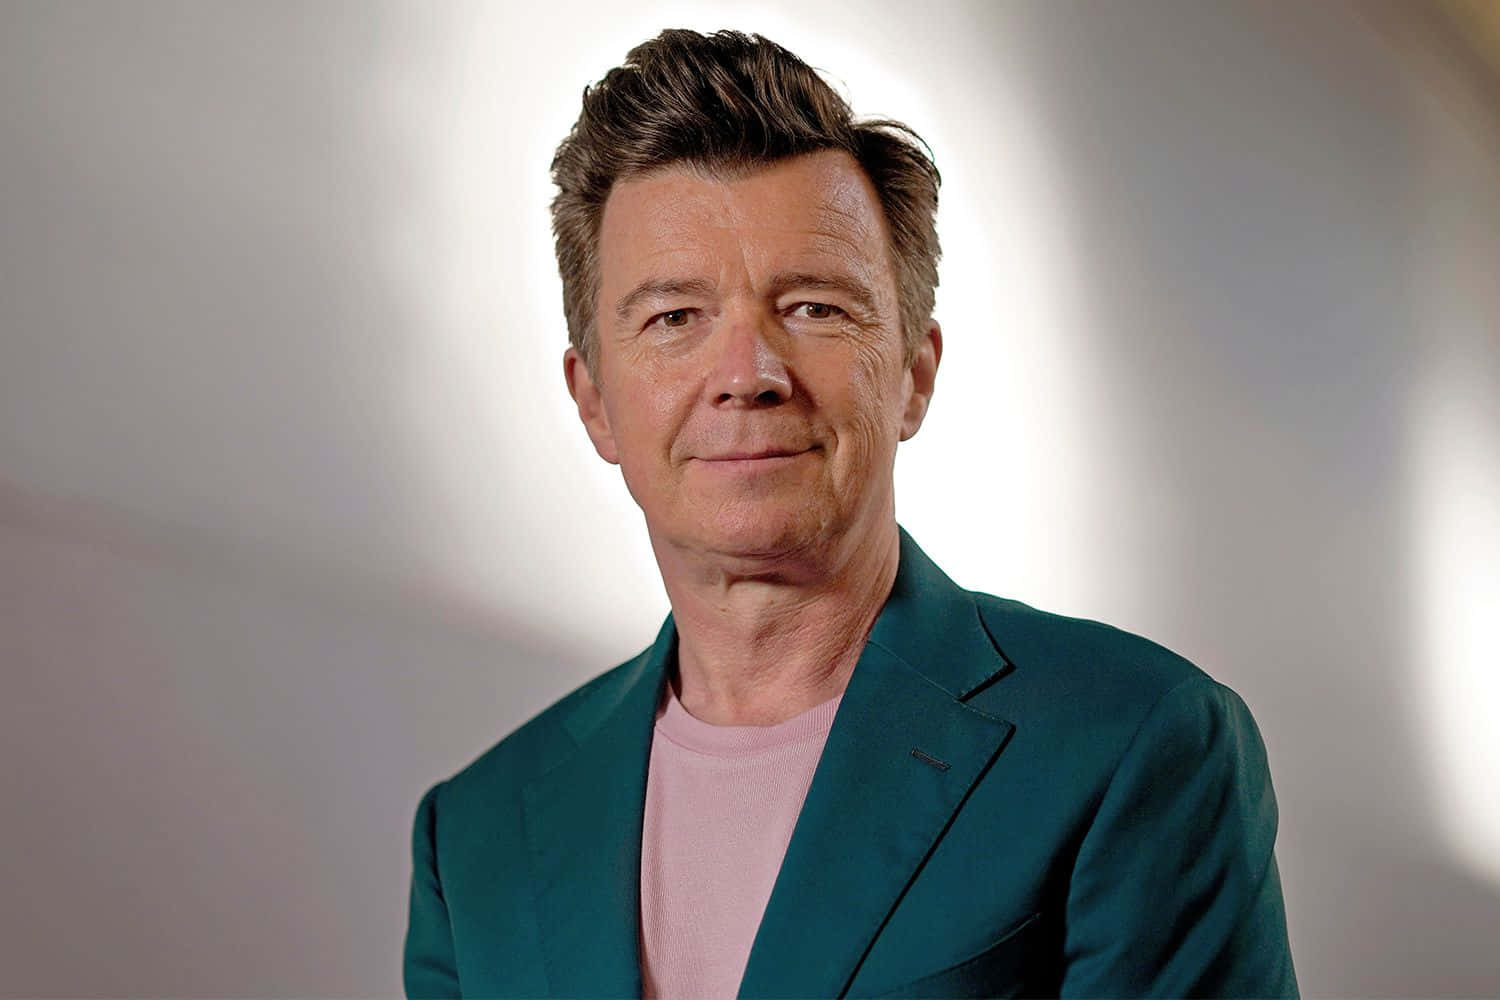 Iconic Singer Rick Astley At A Performance Background